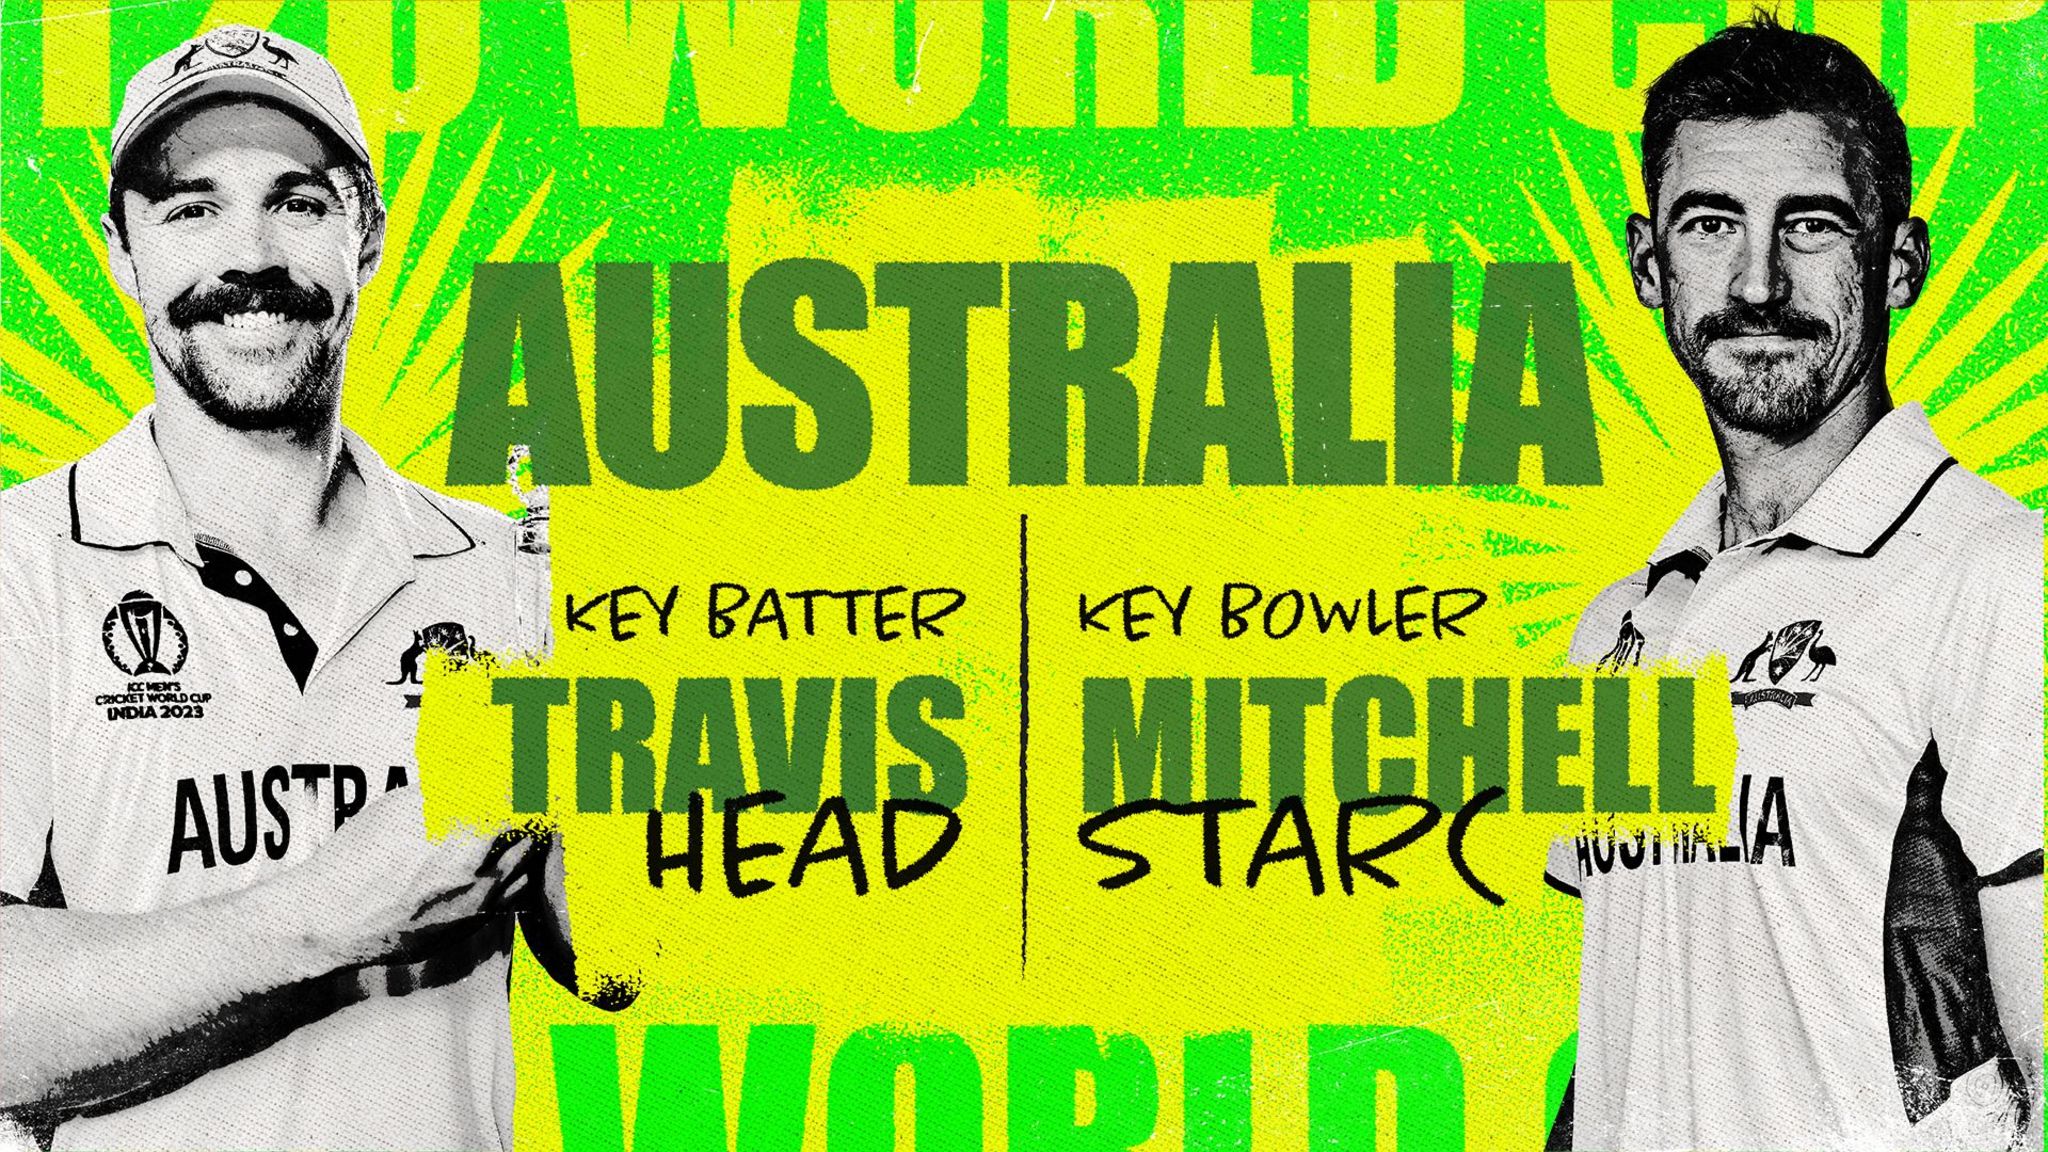 A graphic showing Travis Head and Mitchell Starc as Australia's key batter and key bowler at the Men's T20 World Cup